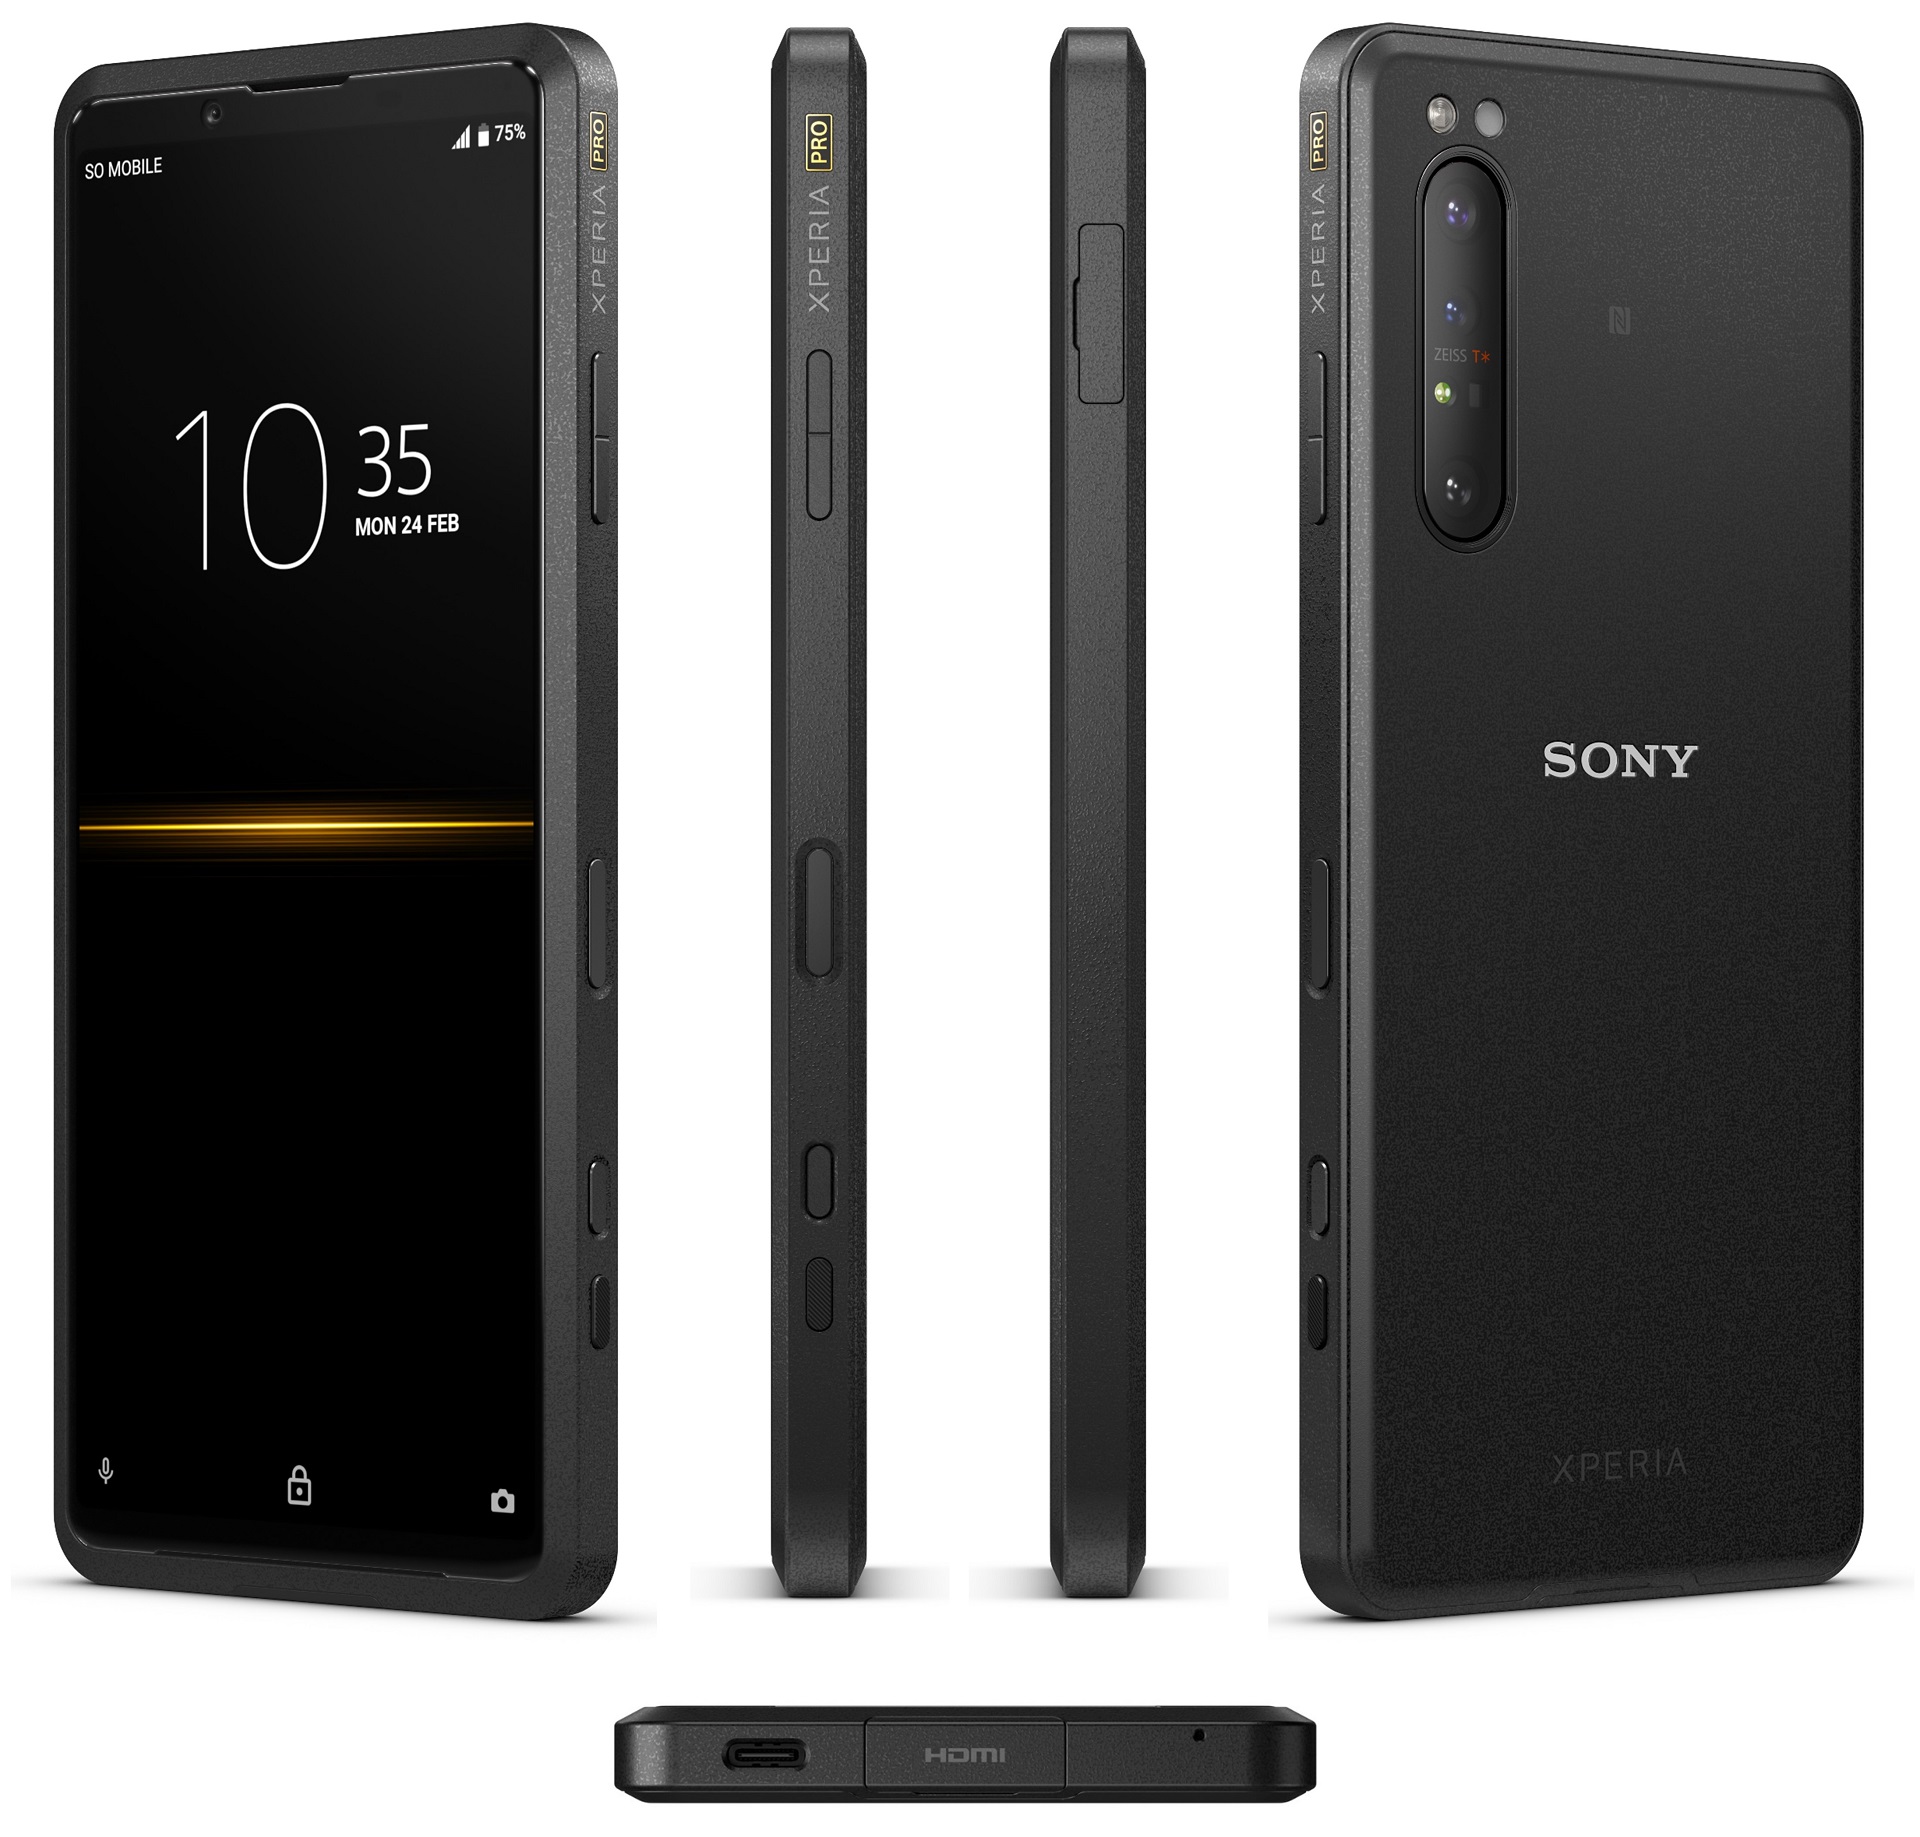 Grof rollen Broederschap Sony Xperia PRO Announced - HDMI Port and 5G mmWave | CineD